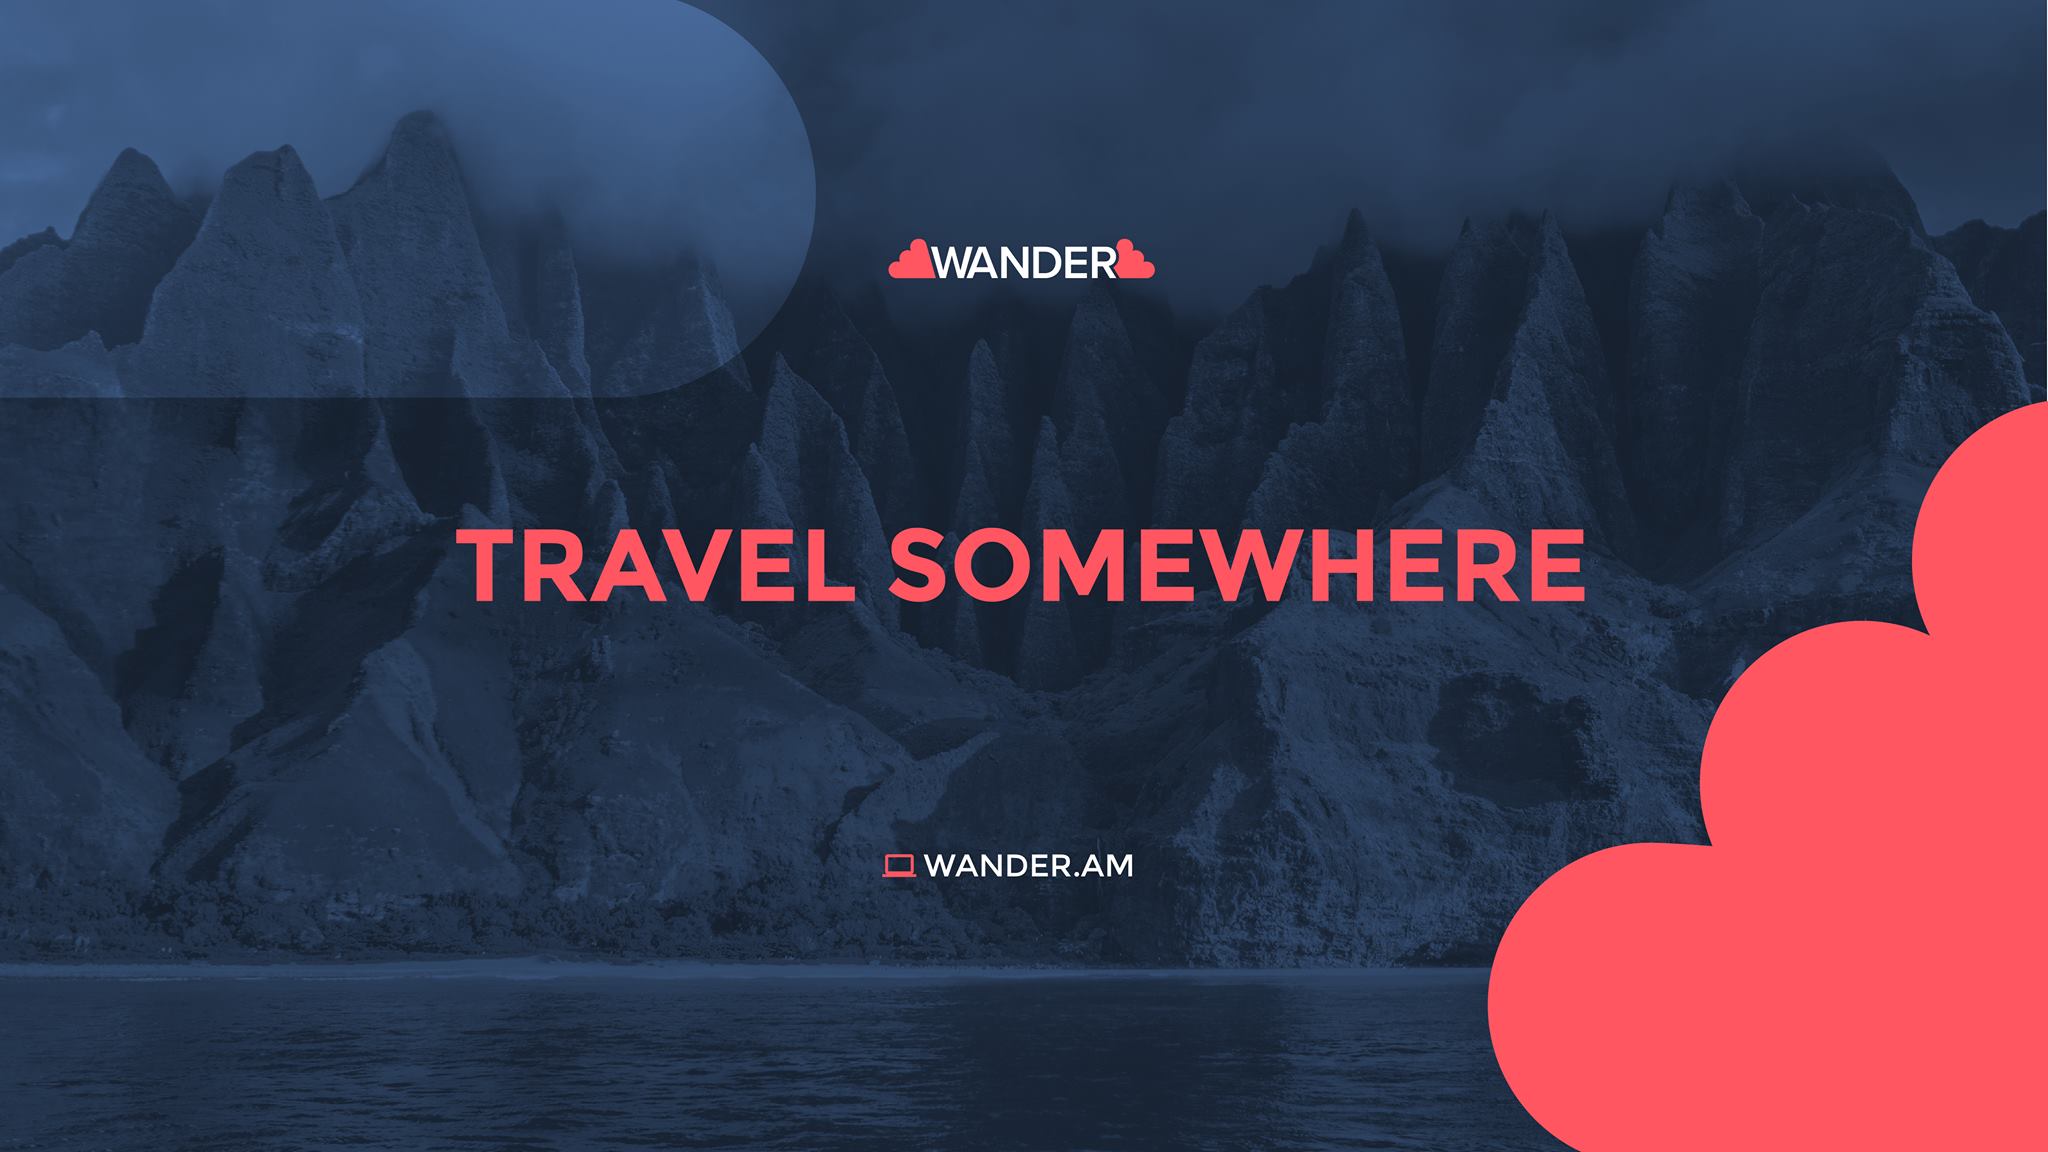 Get All the Travel Details in Your Hand With Wander